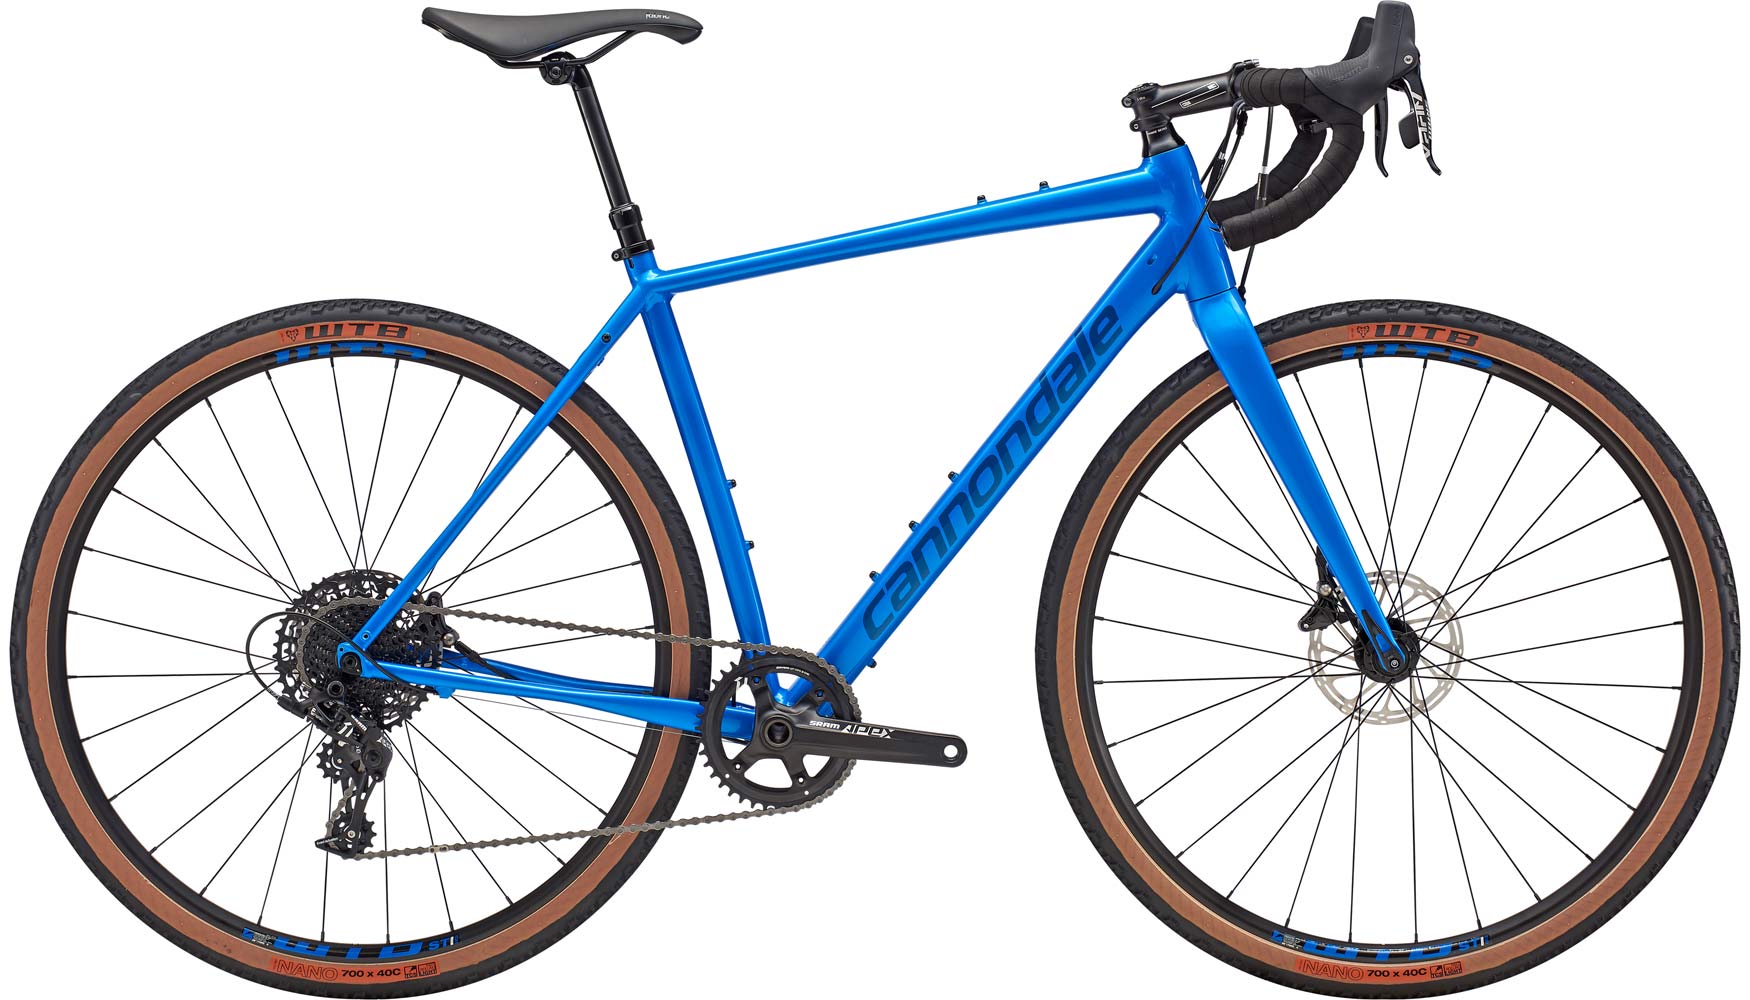 2019 Cannondale Topstone alloy gravel road bike with endurance geometry and wide tire clearance